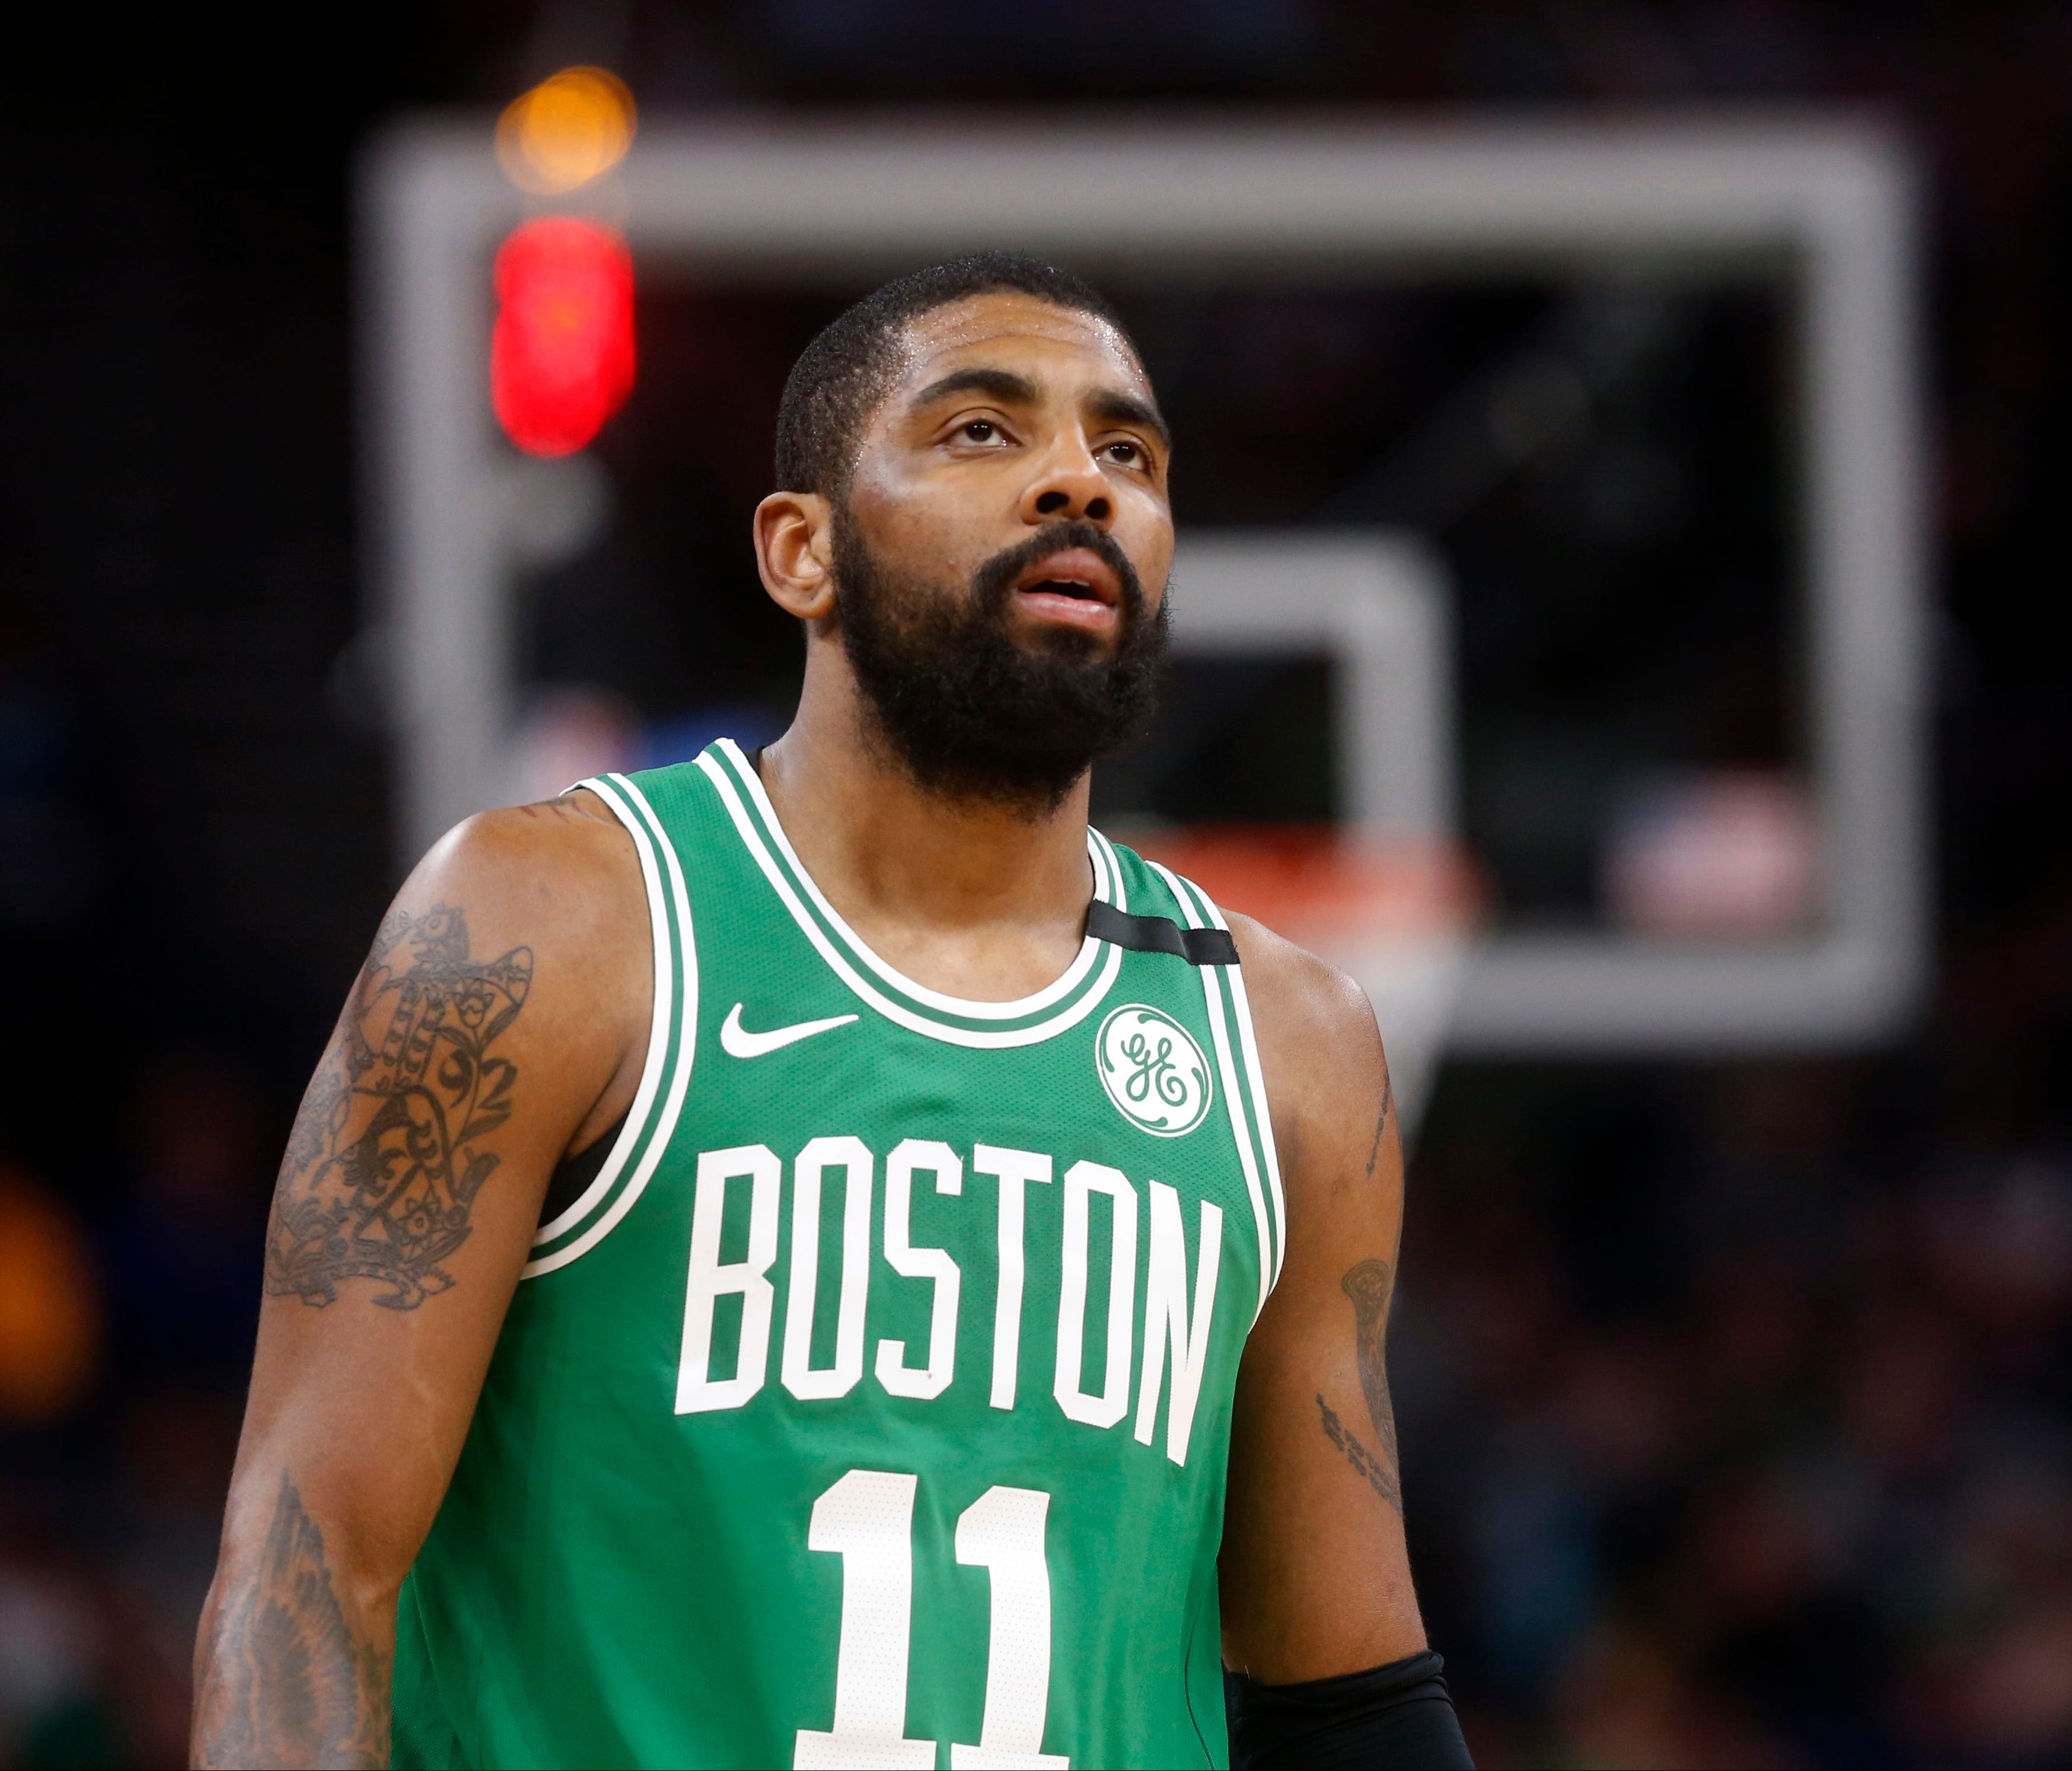 Boston Celtics' Kyrie Irving during a game against the Minnesota Timberwolves.